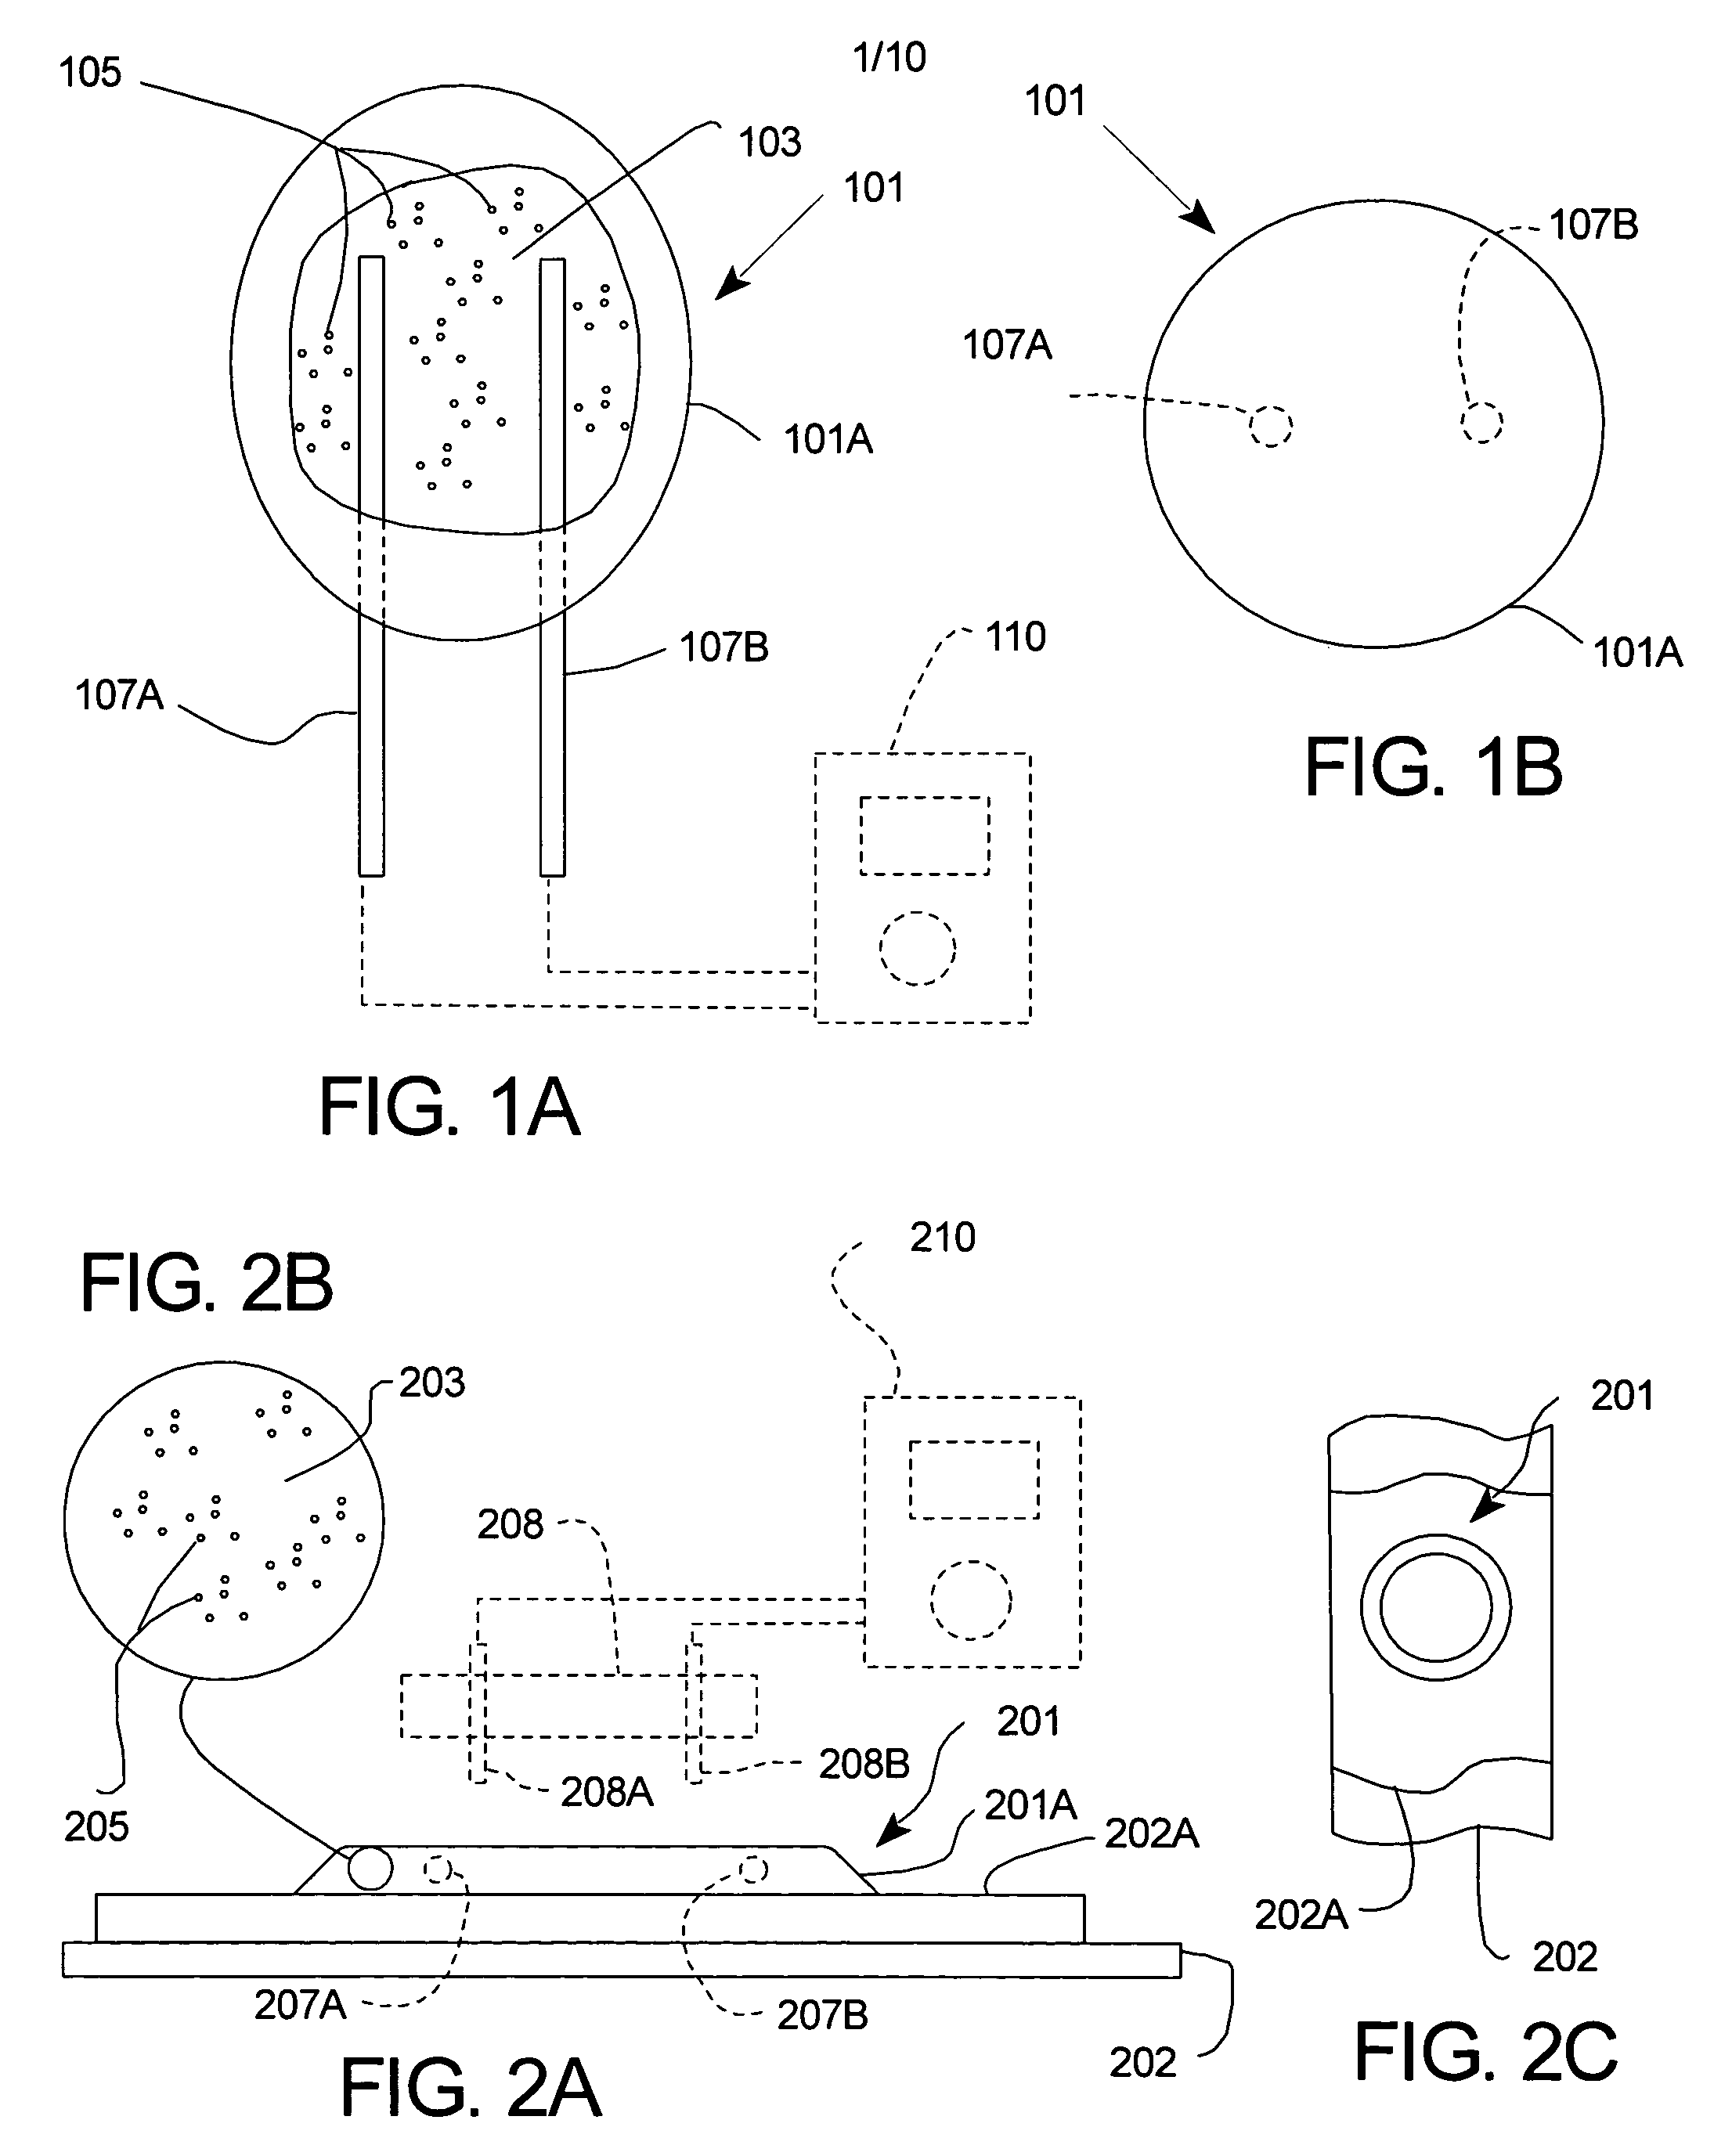 Method and apparatus for measuring degradation of insulation of electrical power system devices